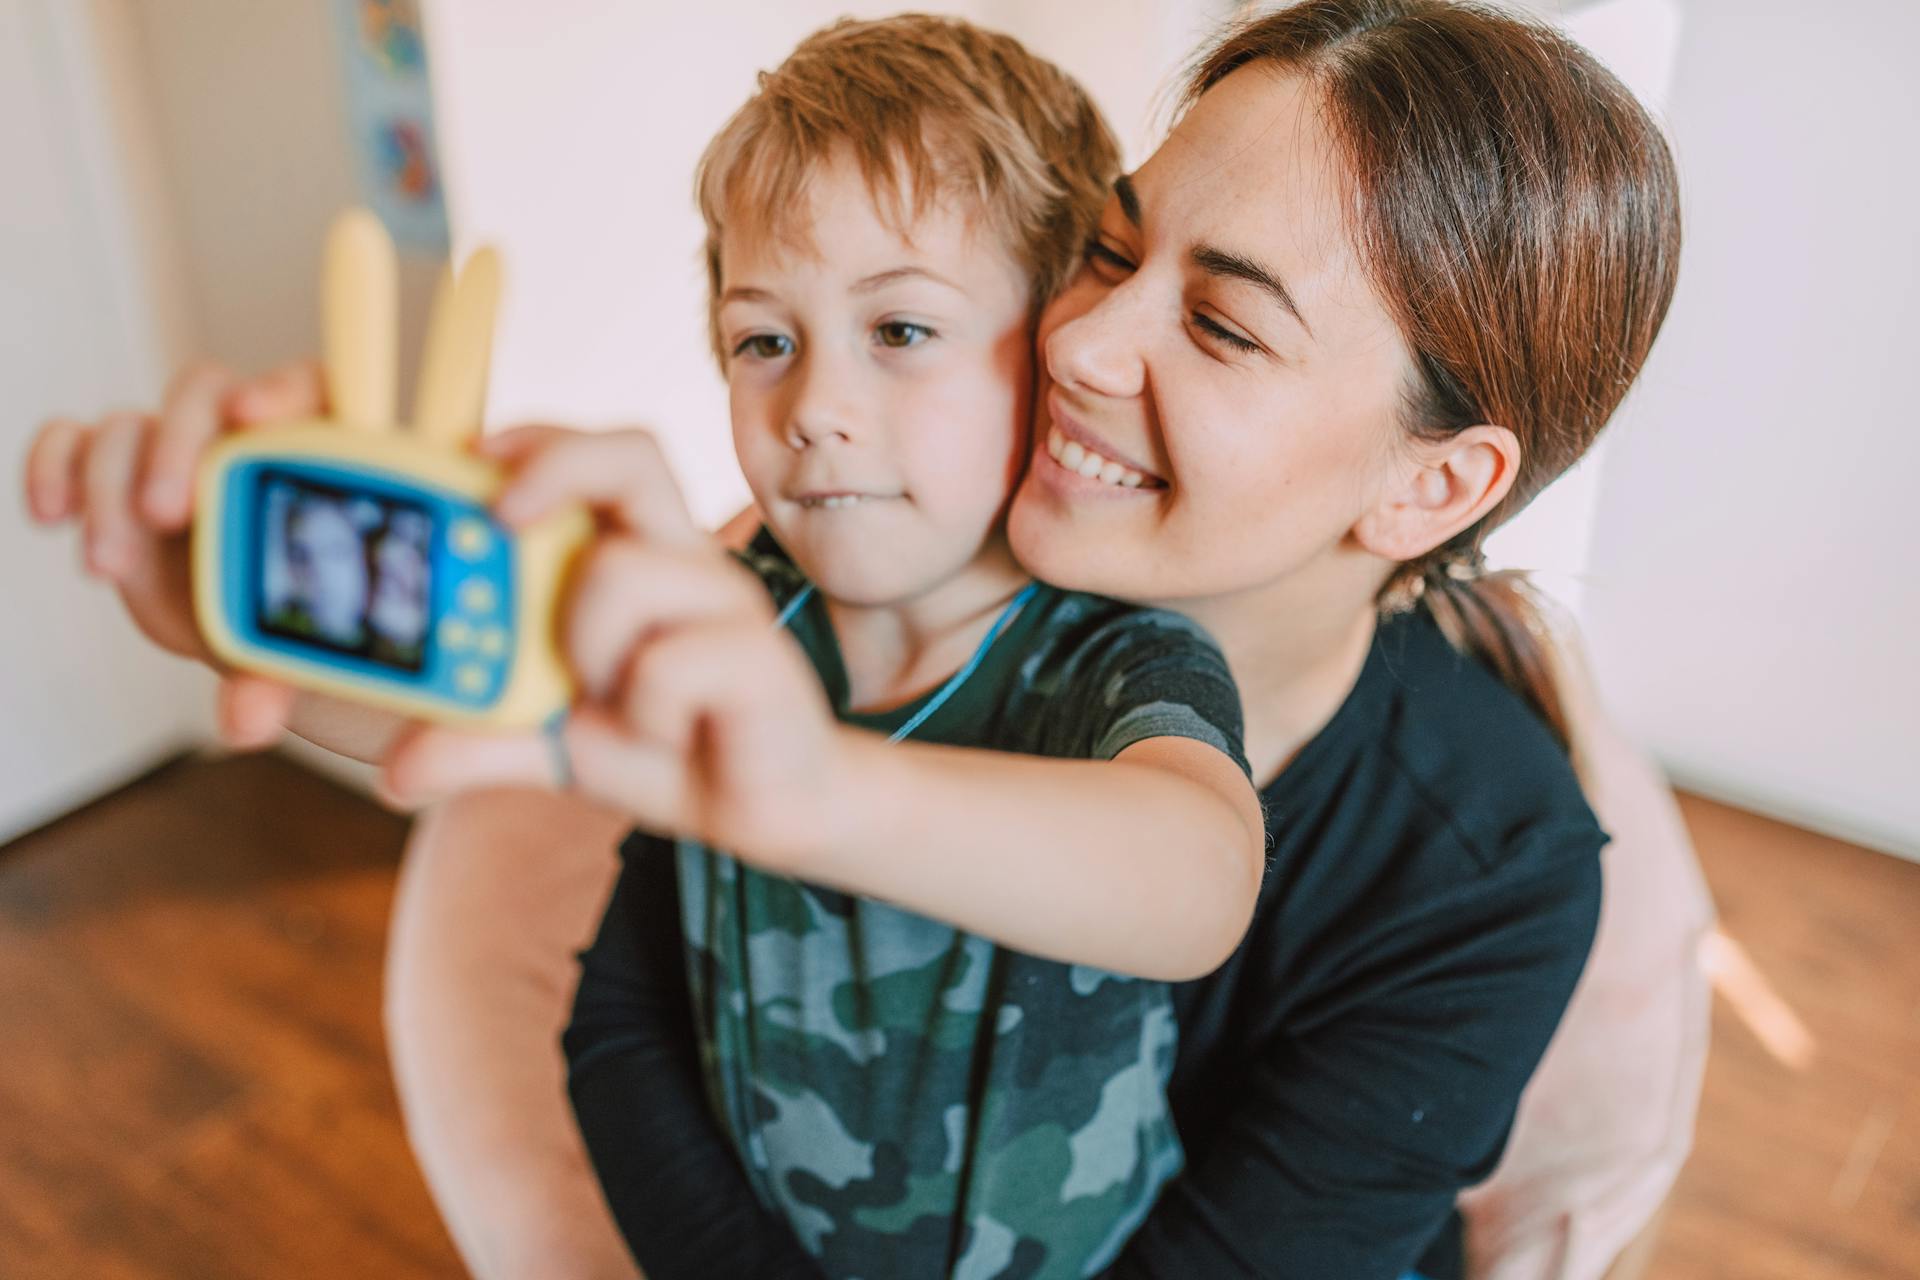 Young boy taking a picture with his mother | Source: Pexels